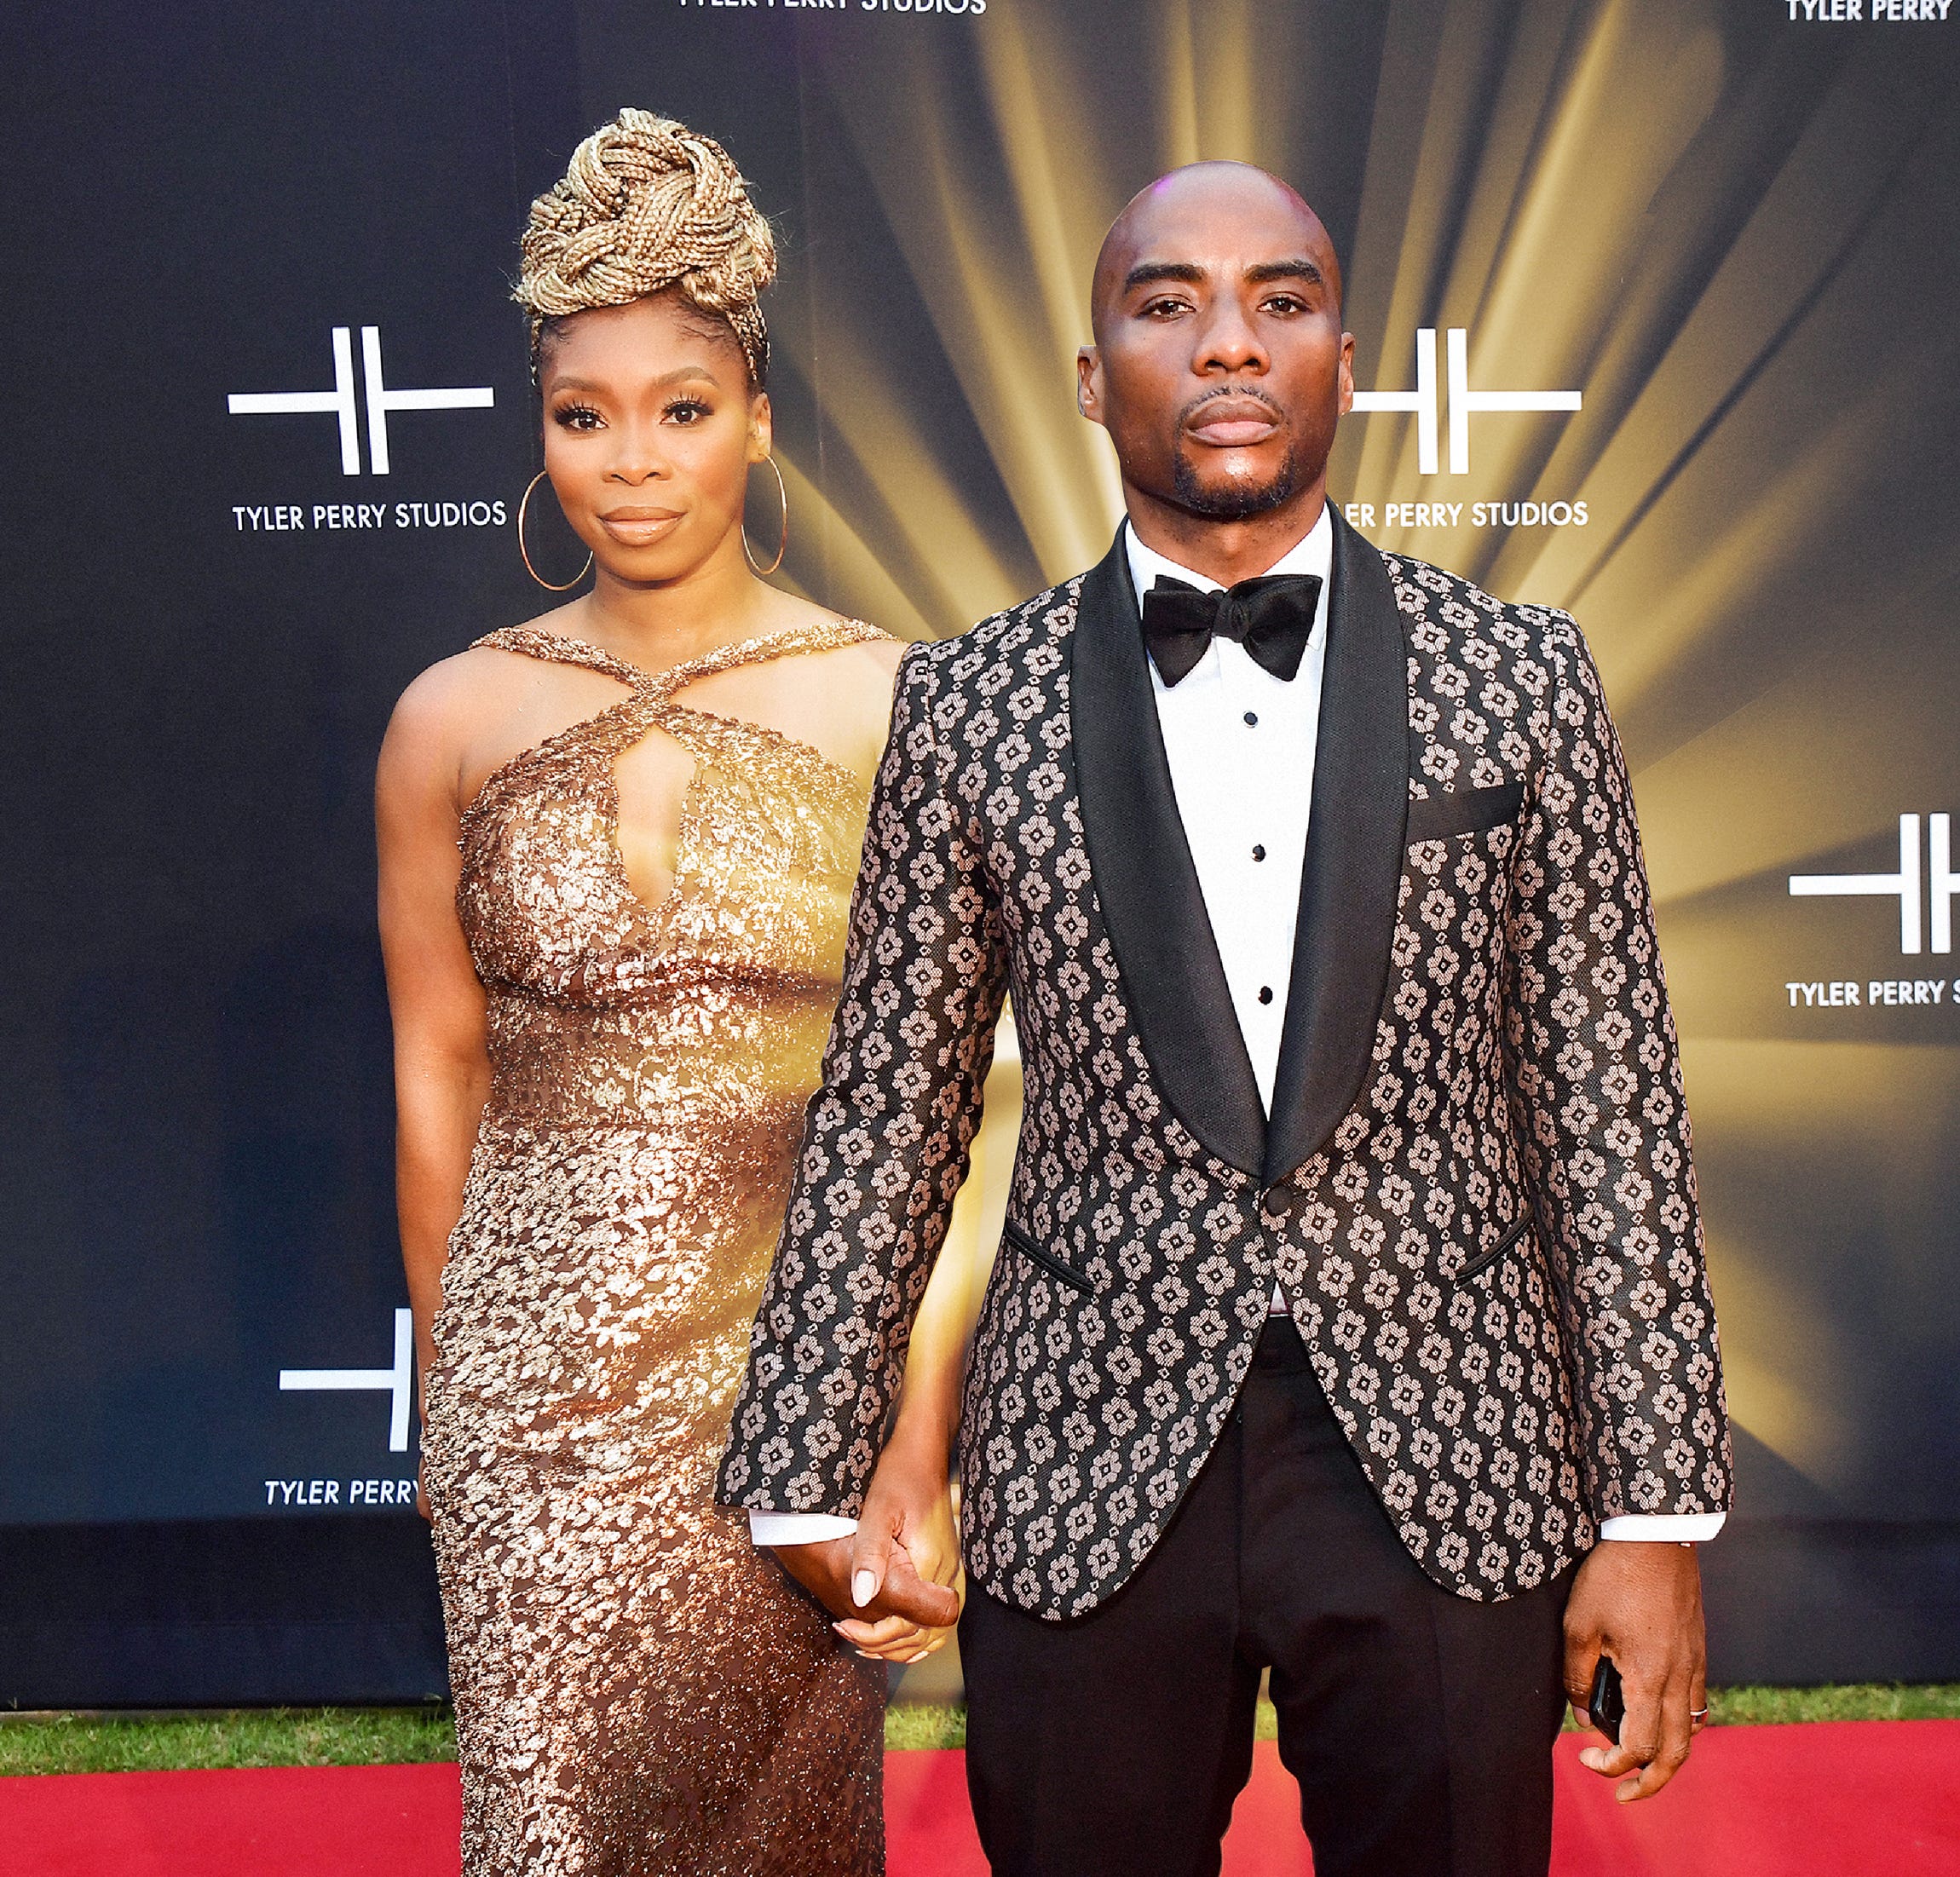 Charlamagne Tha God with a golden light radiating from behind him with his wife, Jessica Gadsden.